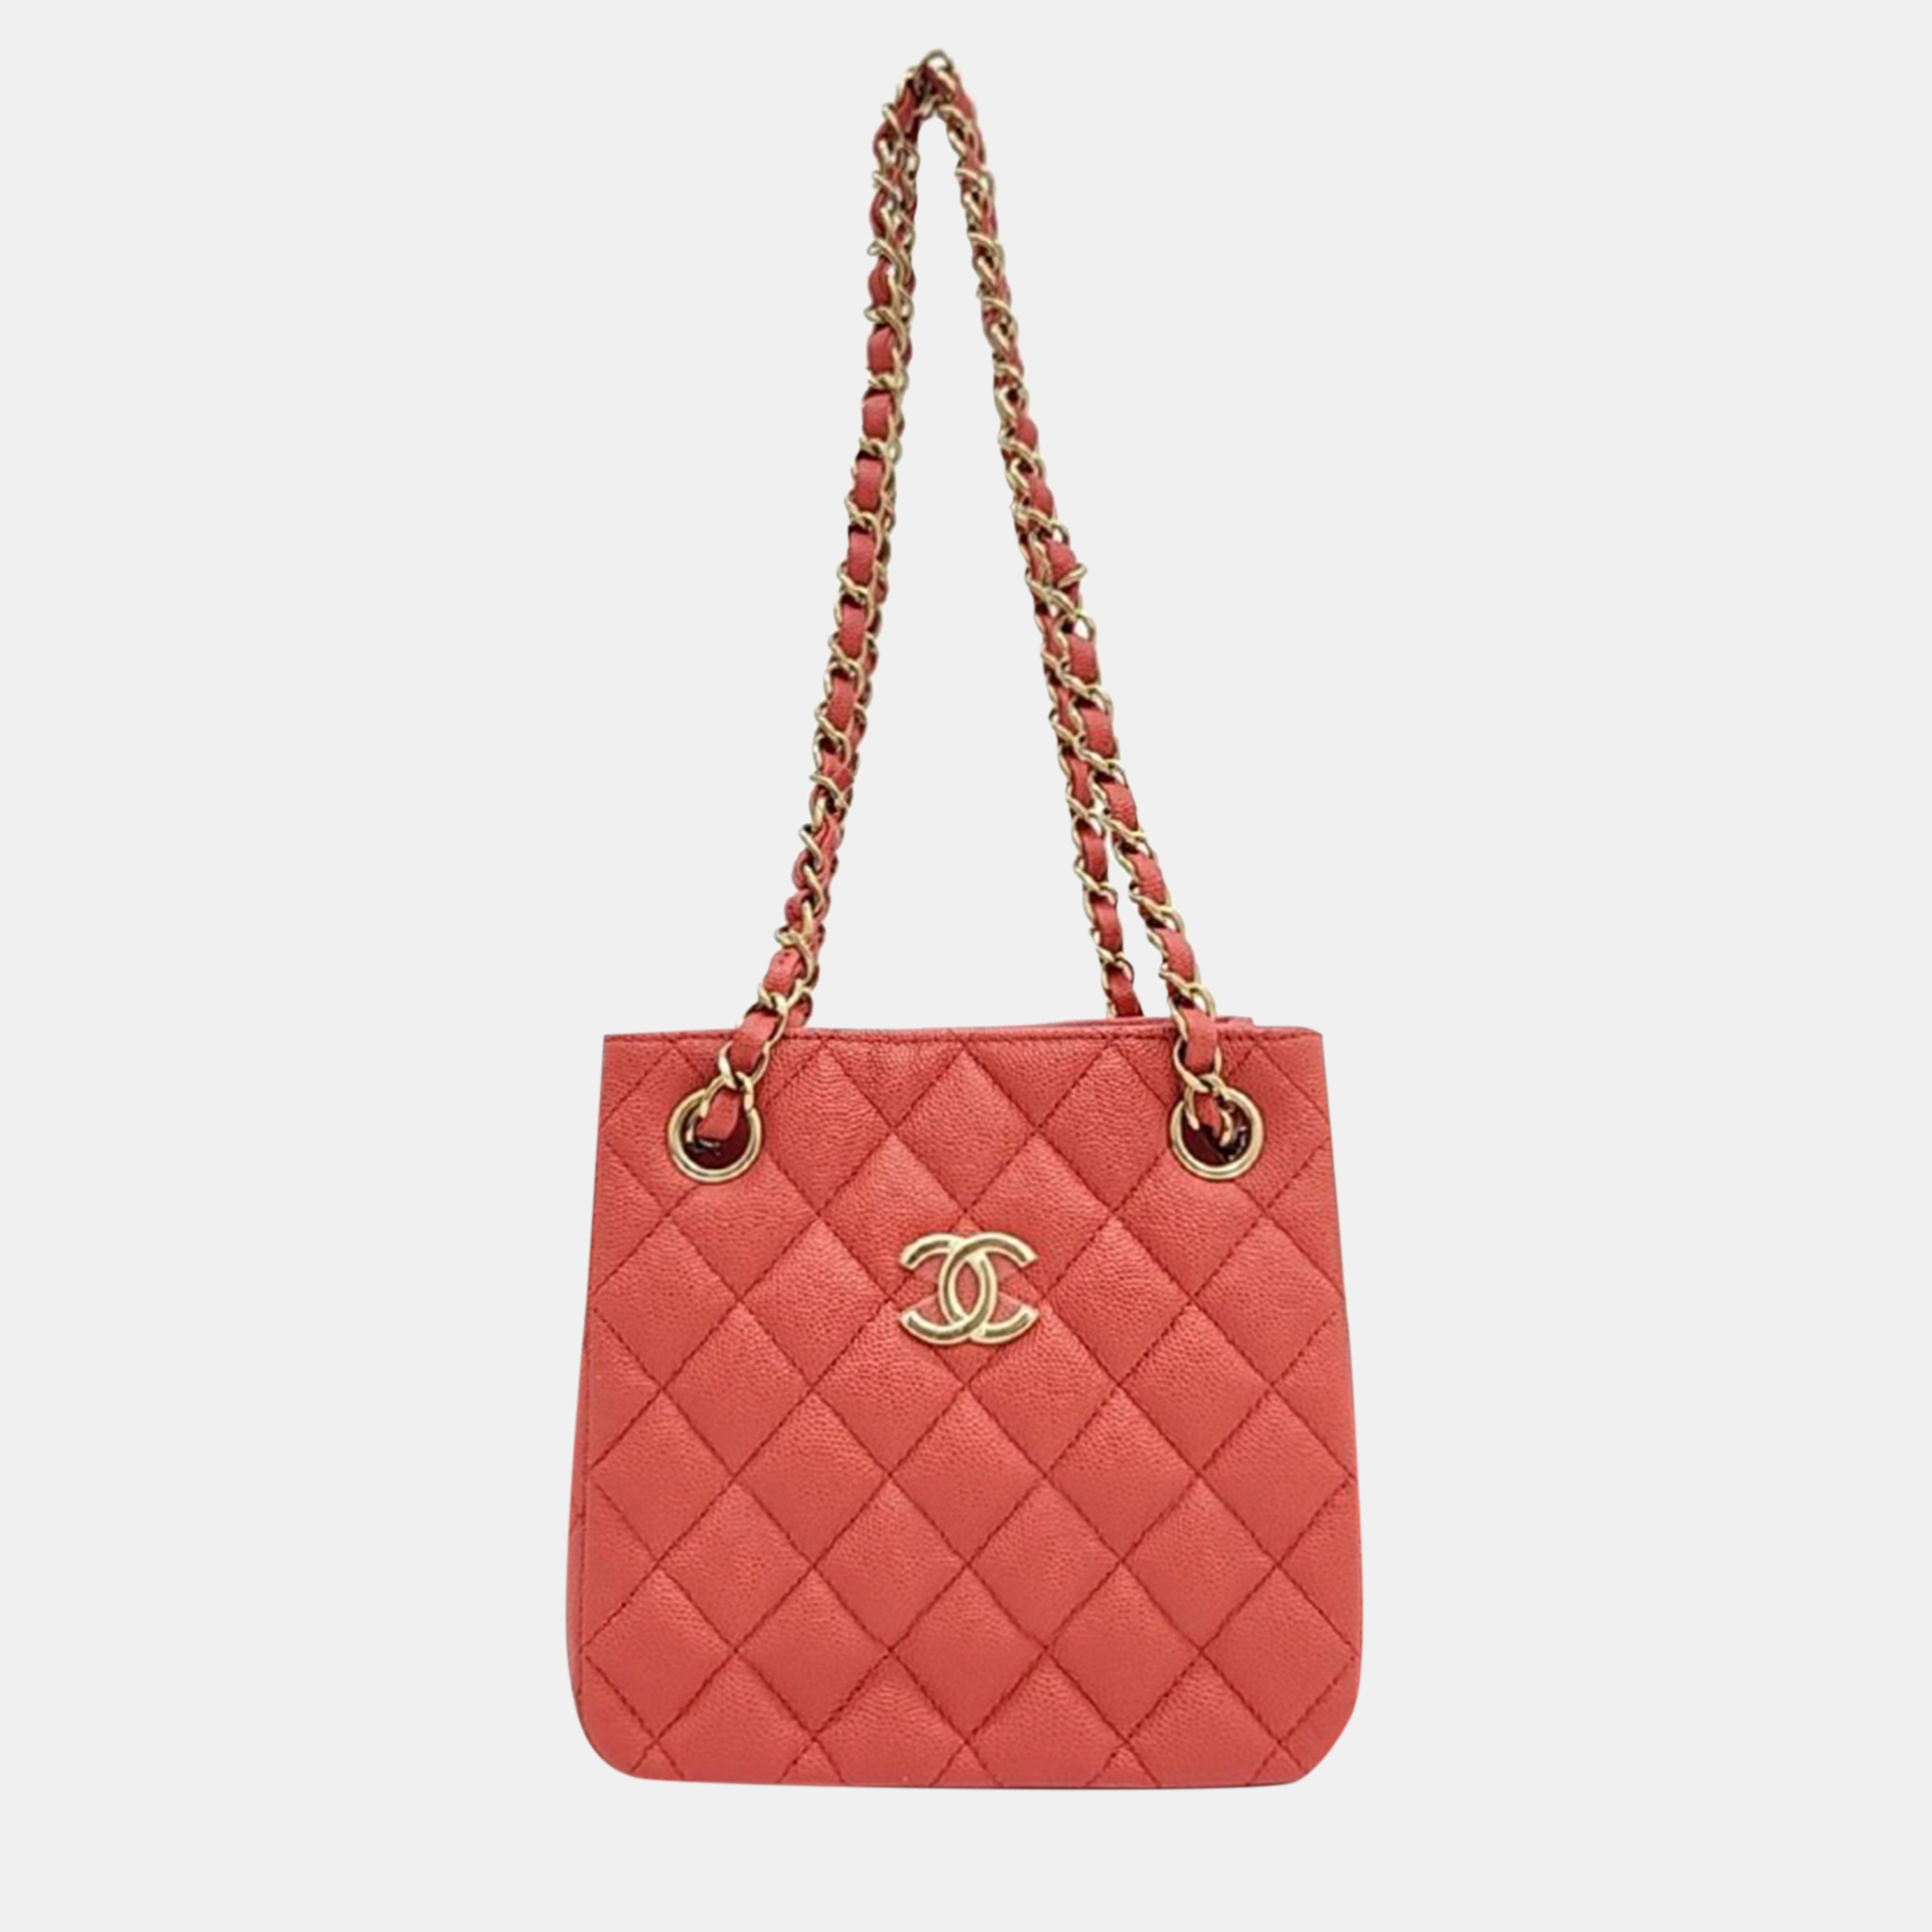 Chanel red caviar leather chain bucket bag